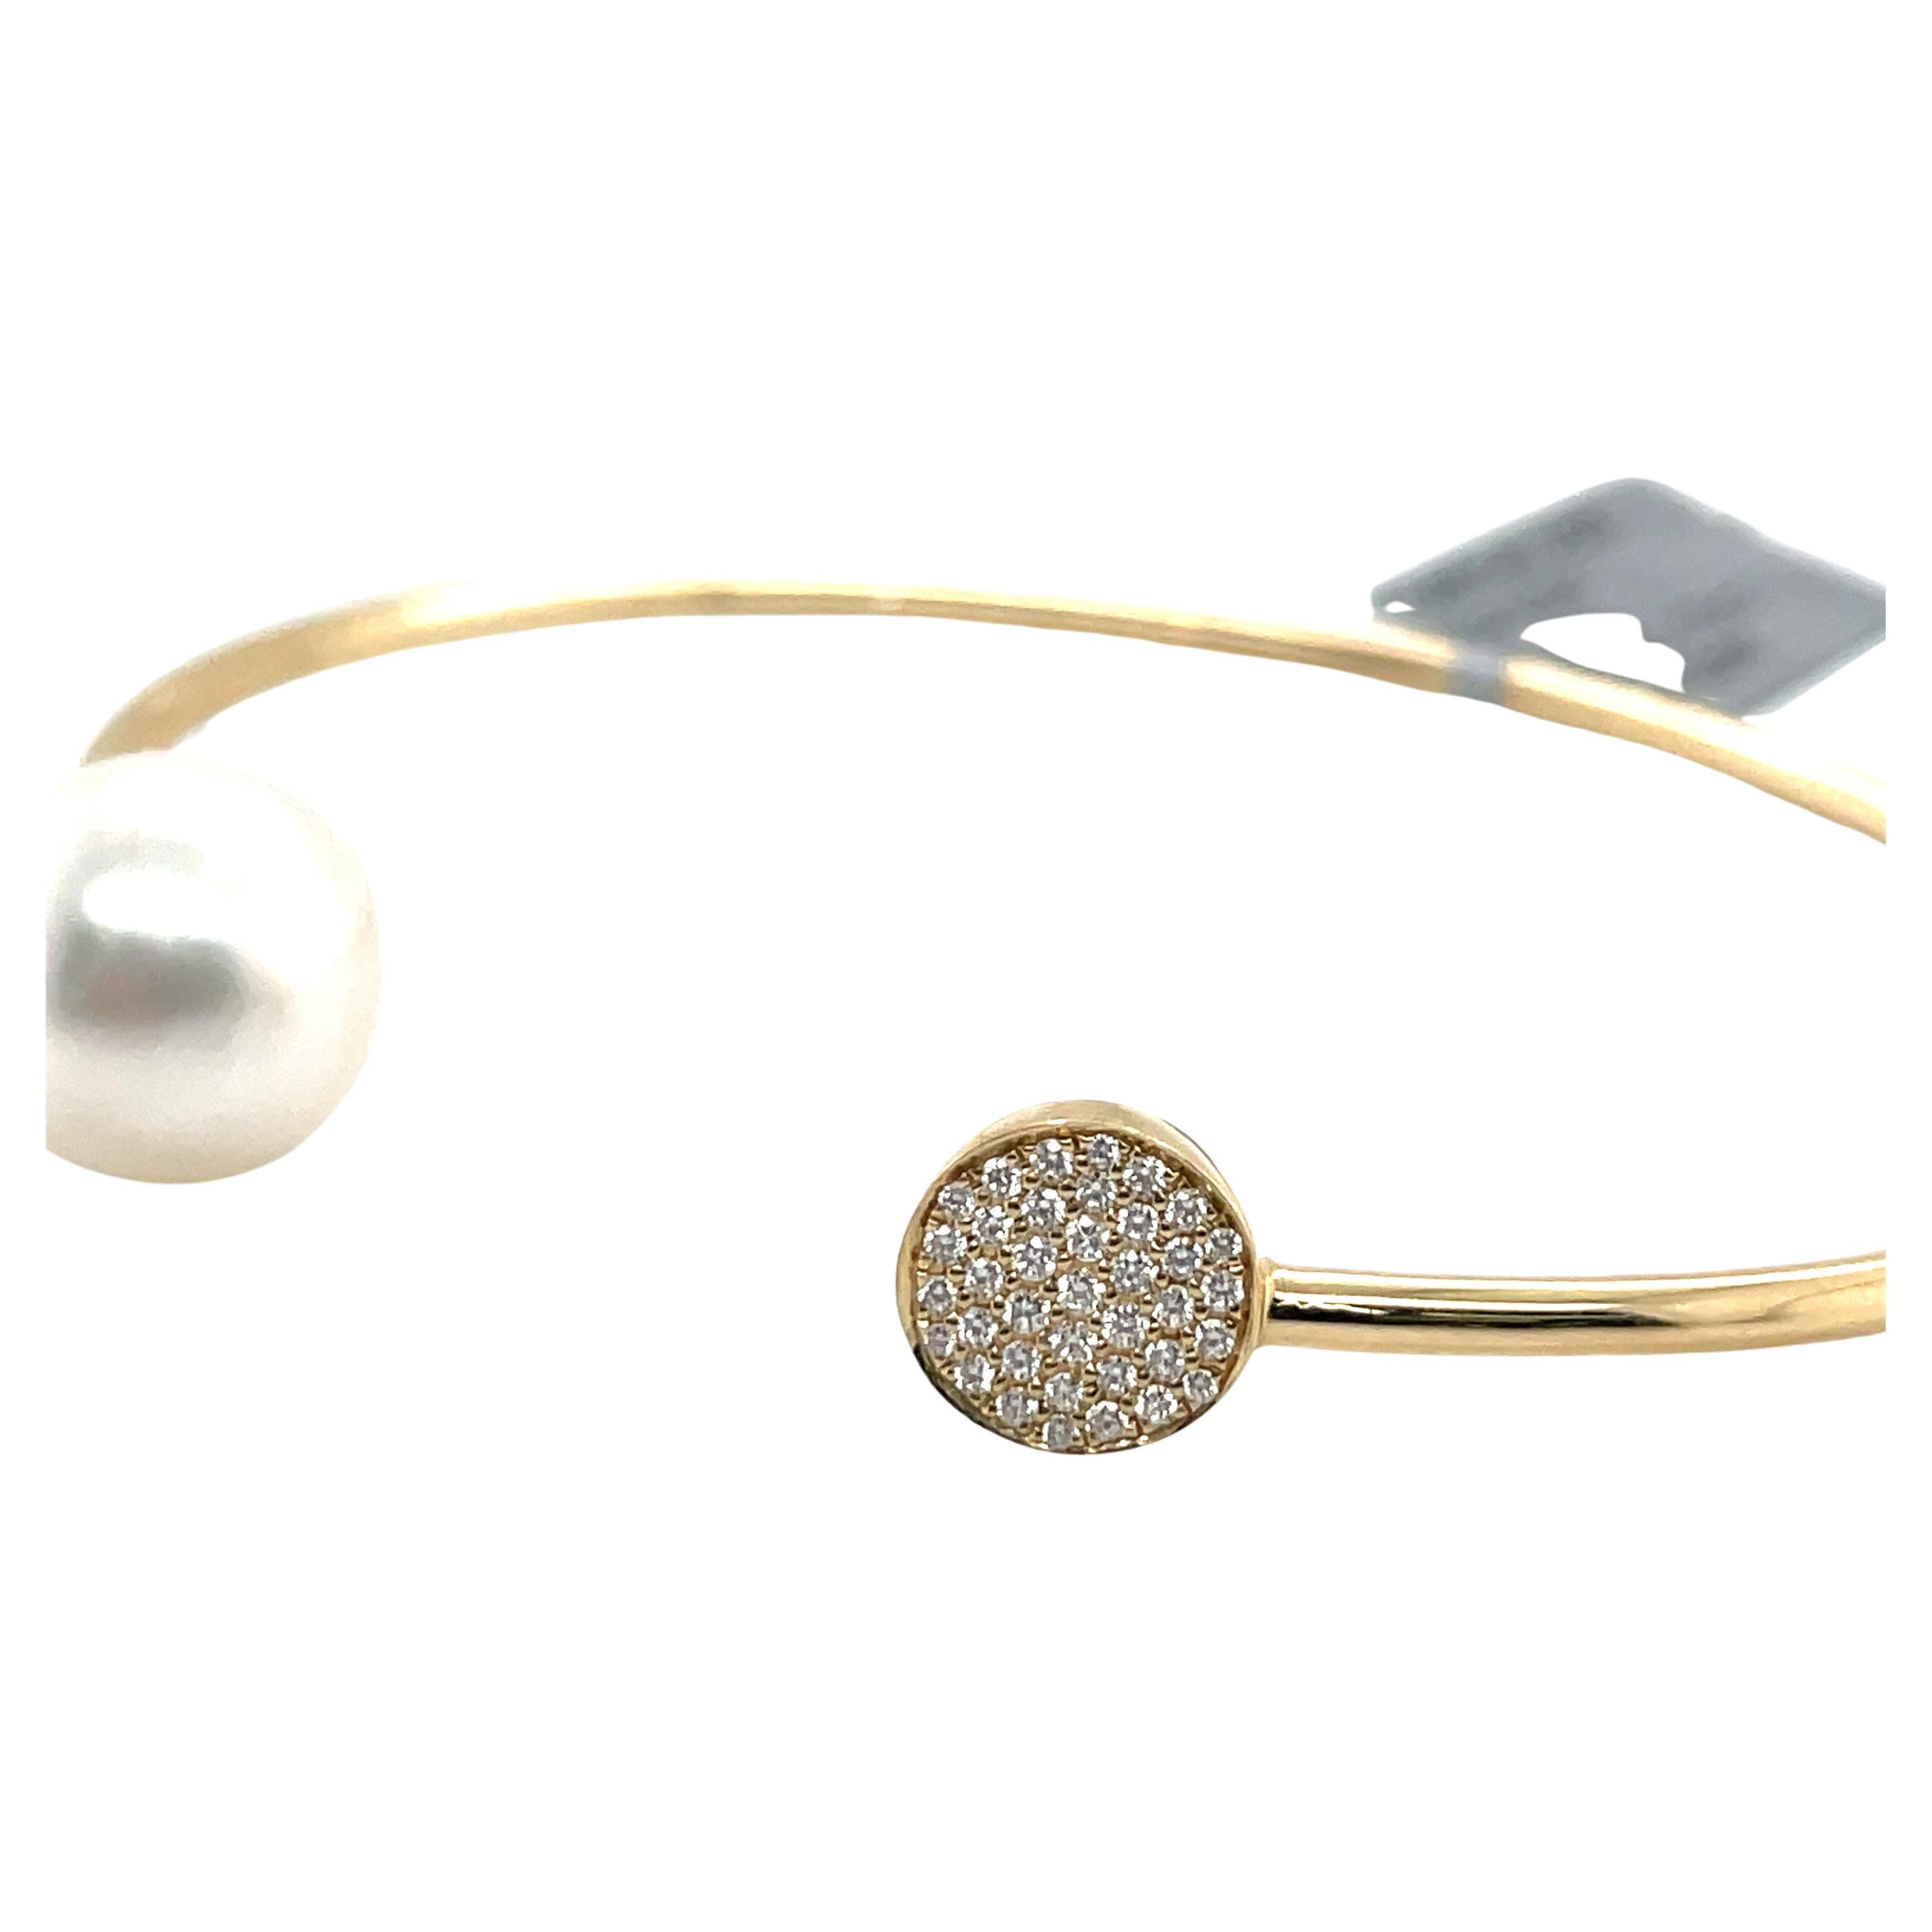 14 Karat Yellow Gold open bracelet cuff featuring 37 round brilliants weighing 0.13 Carats and one South Sea Pearl measuring 11-12 MM.
Comes in White Gold and can customize Pearl Color 